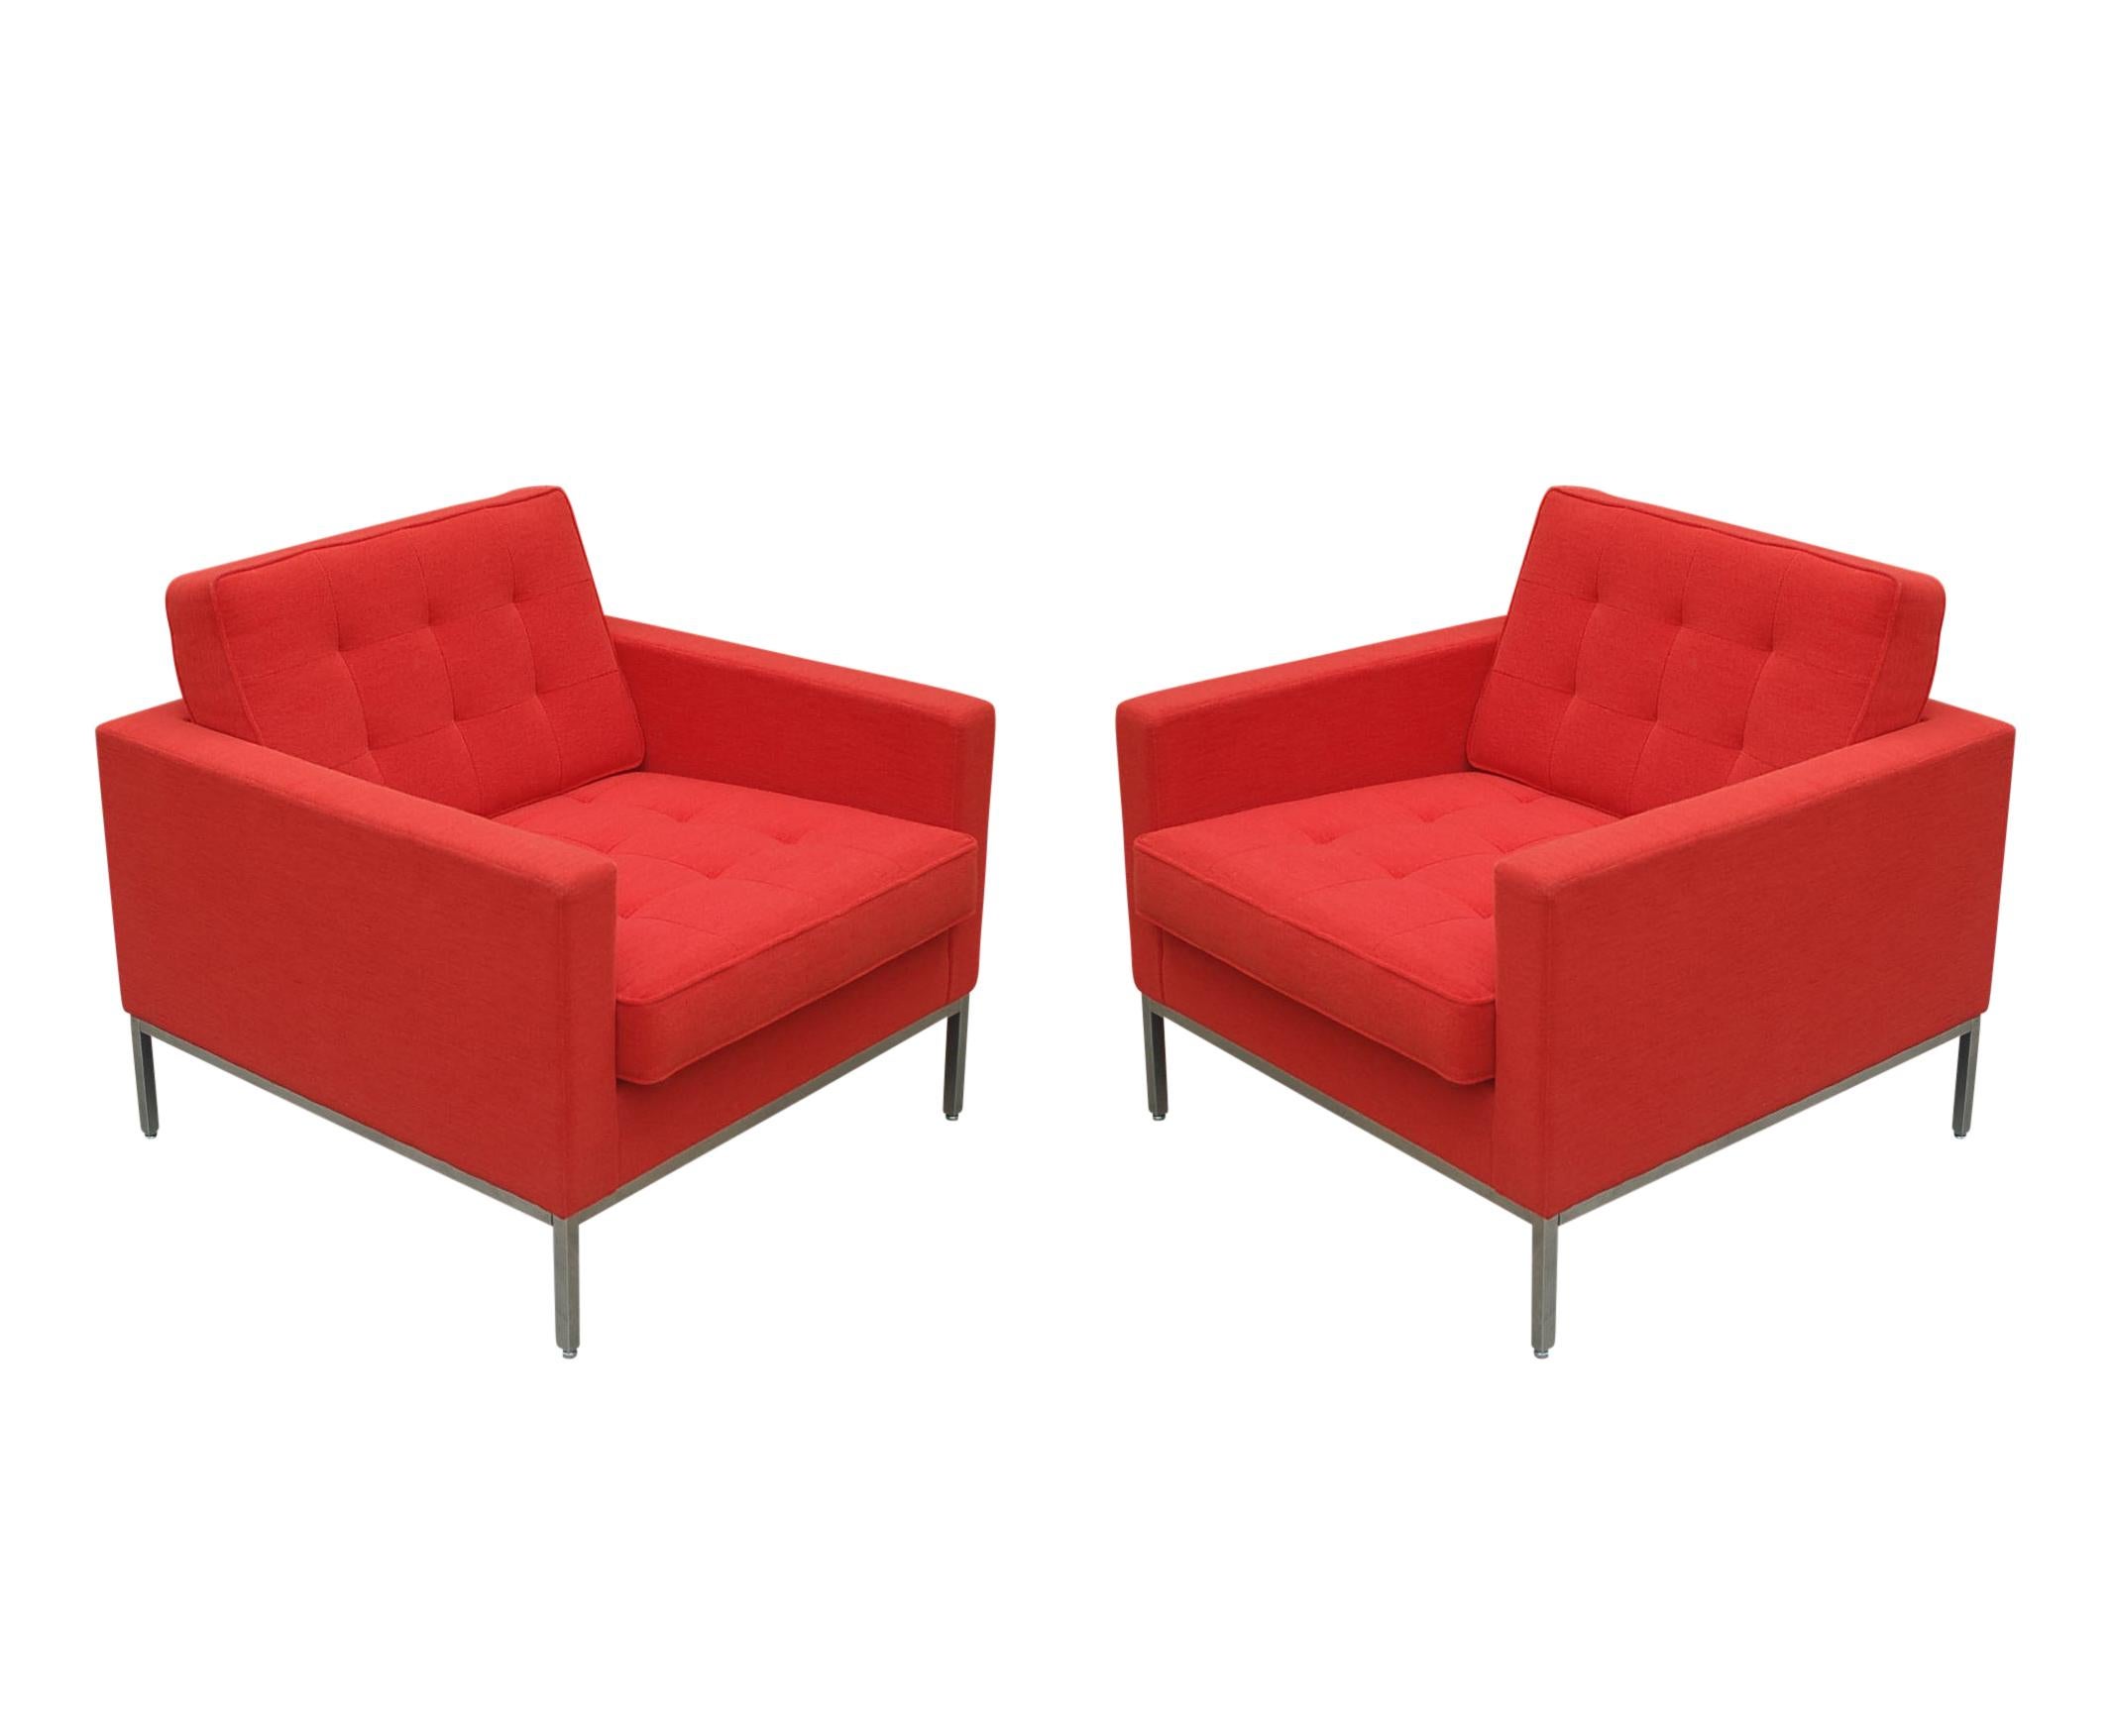 American Florence Knoll for Knoll Sofa and Matching Lounge Chairs Living Room Set in Red